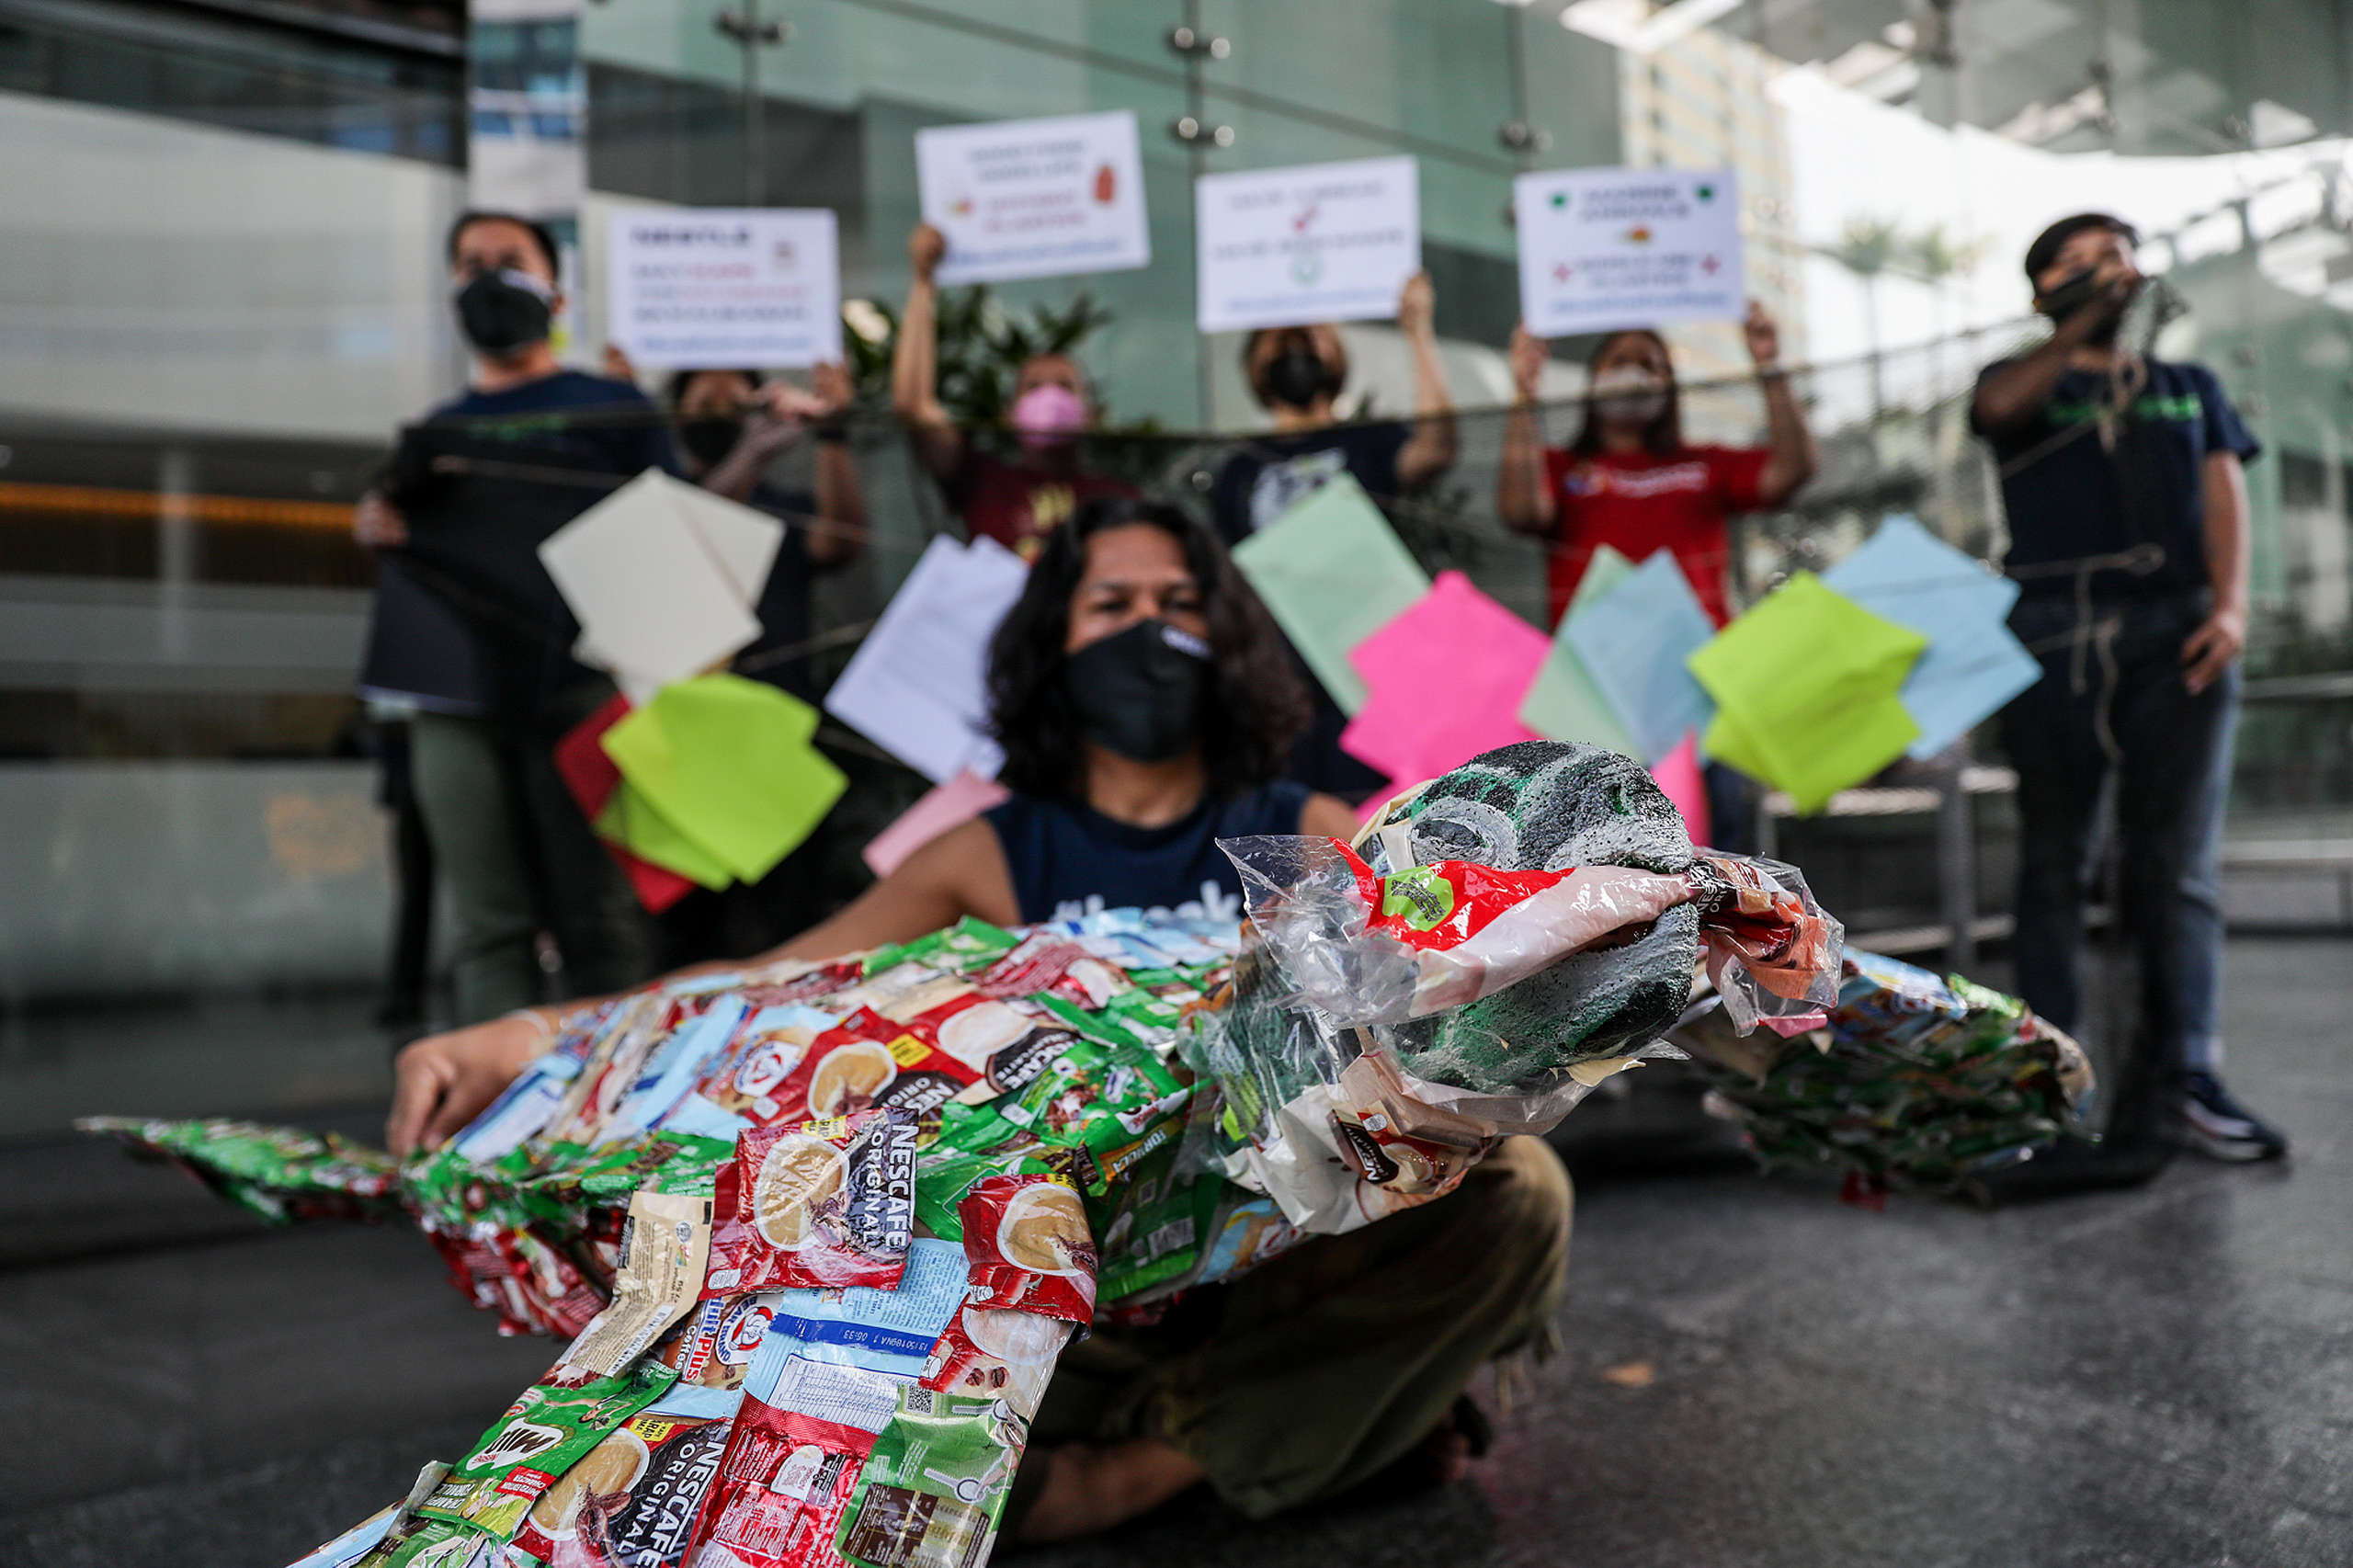 Members of Greenpeace Philippines and the Break Free From Plastic movement deliver a sea turtle made of plastic packaging waste during a protest at the Nestle headquarters in Rockwell Center, Makati.